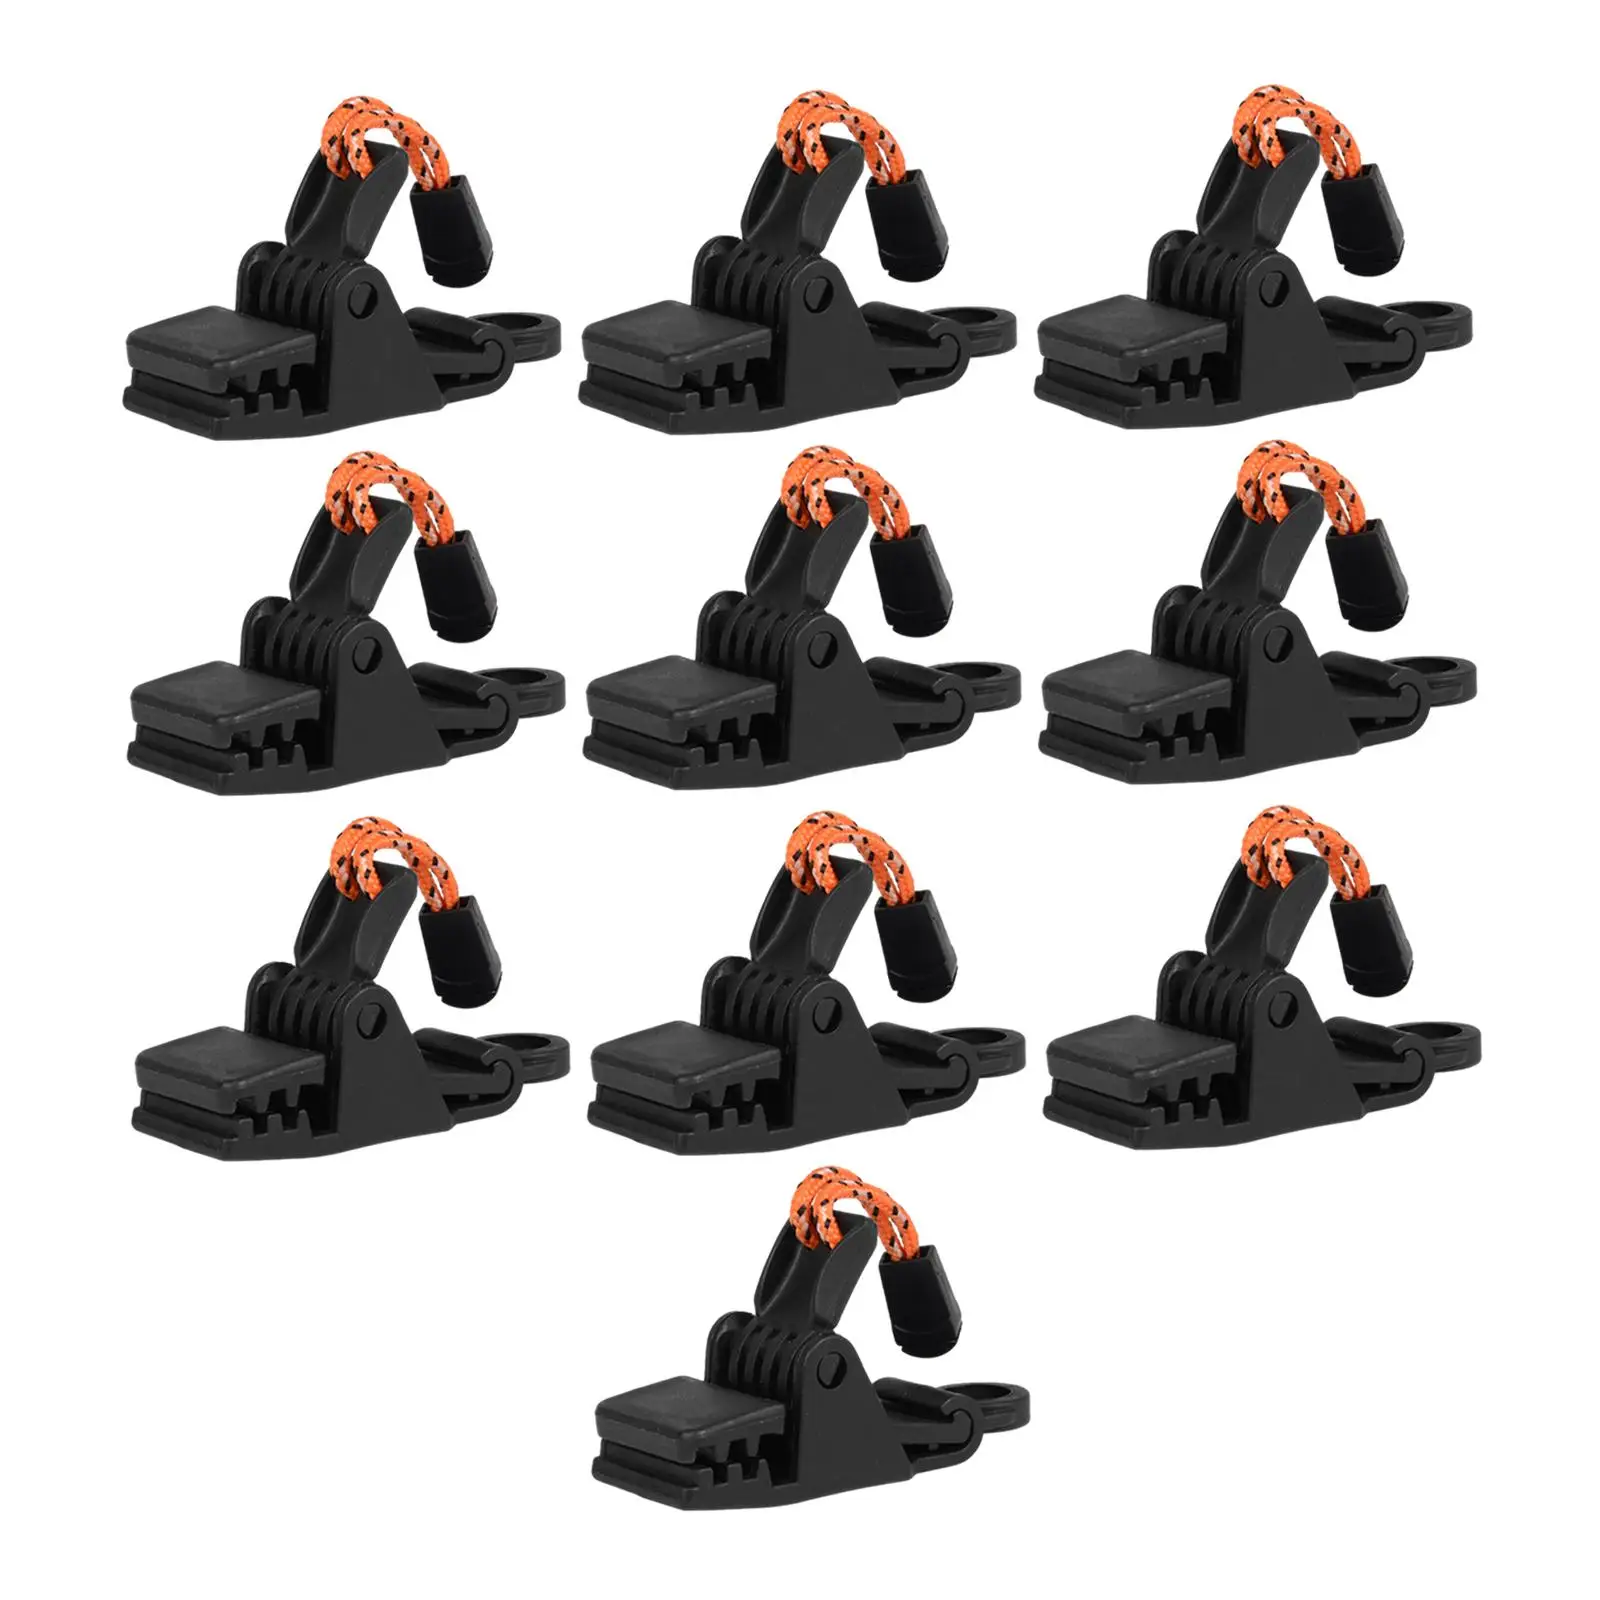 10 Pieces Tarp Clips Heavy Duty Portable Durable Awning Clamps for Swimming Pool Covers Car Covers Boat Cover Hiking Shade Cloth